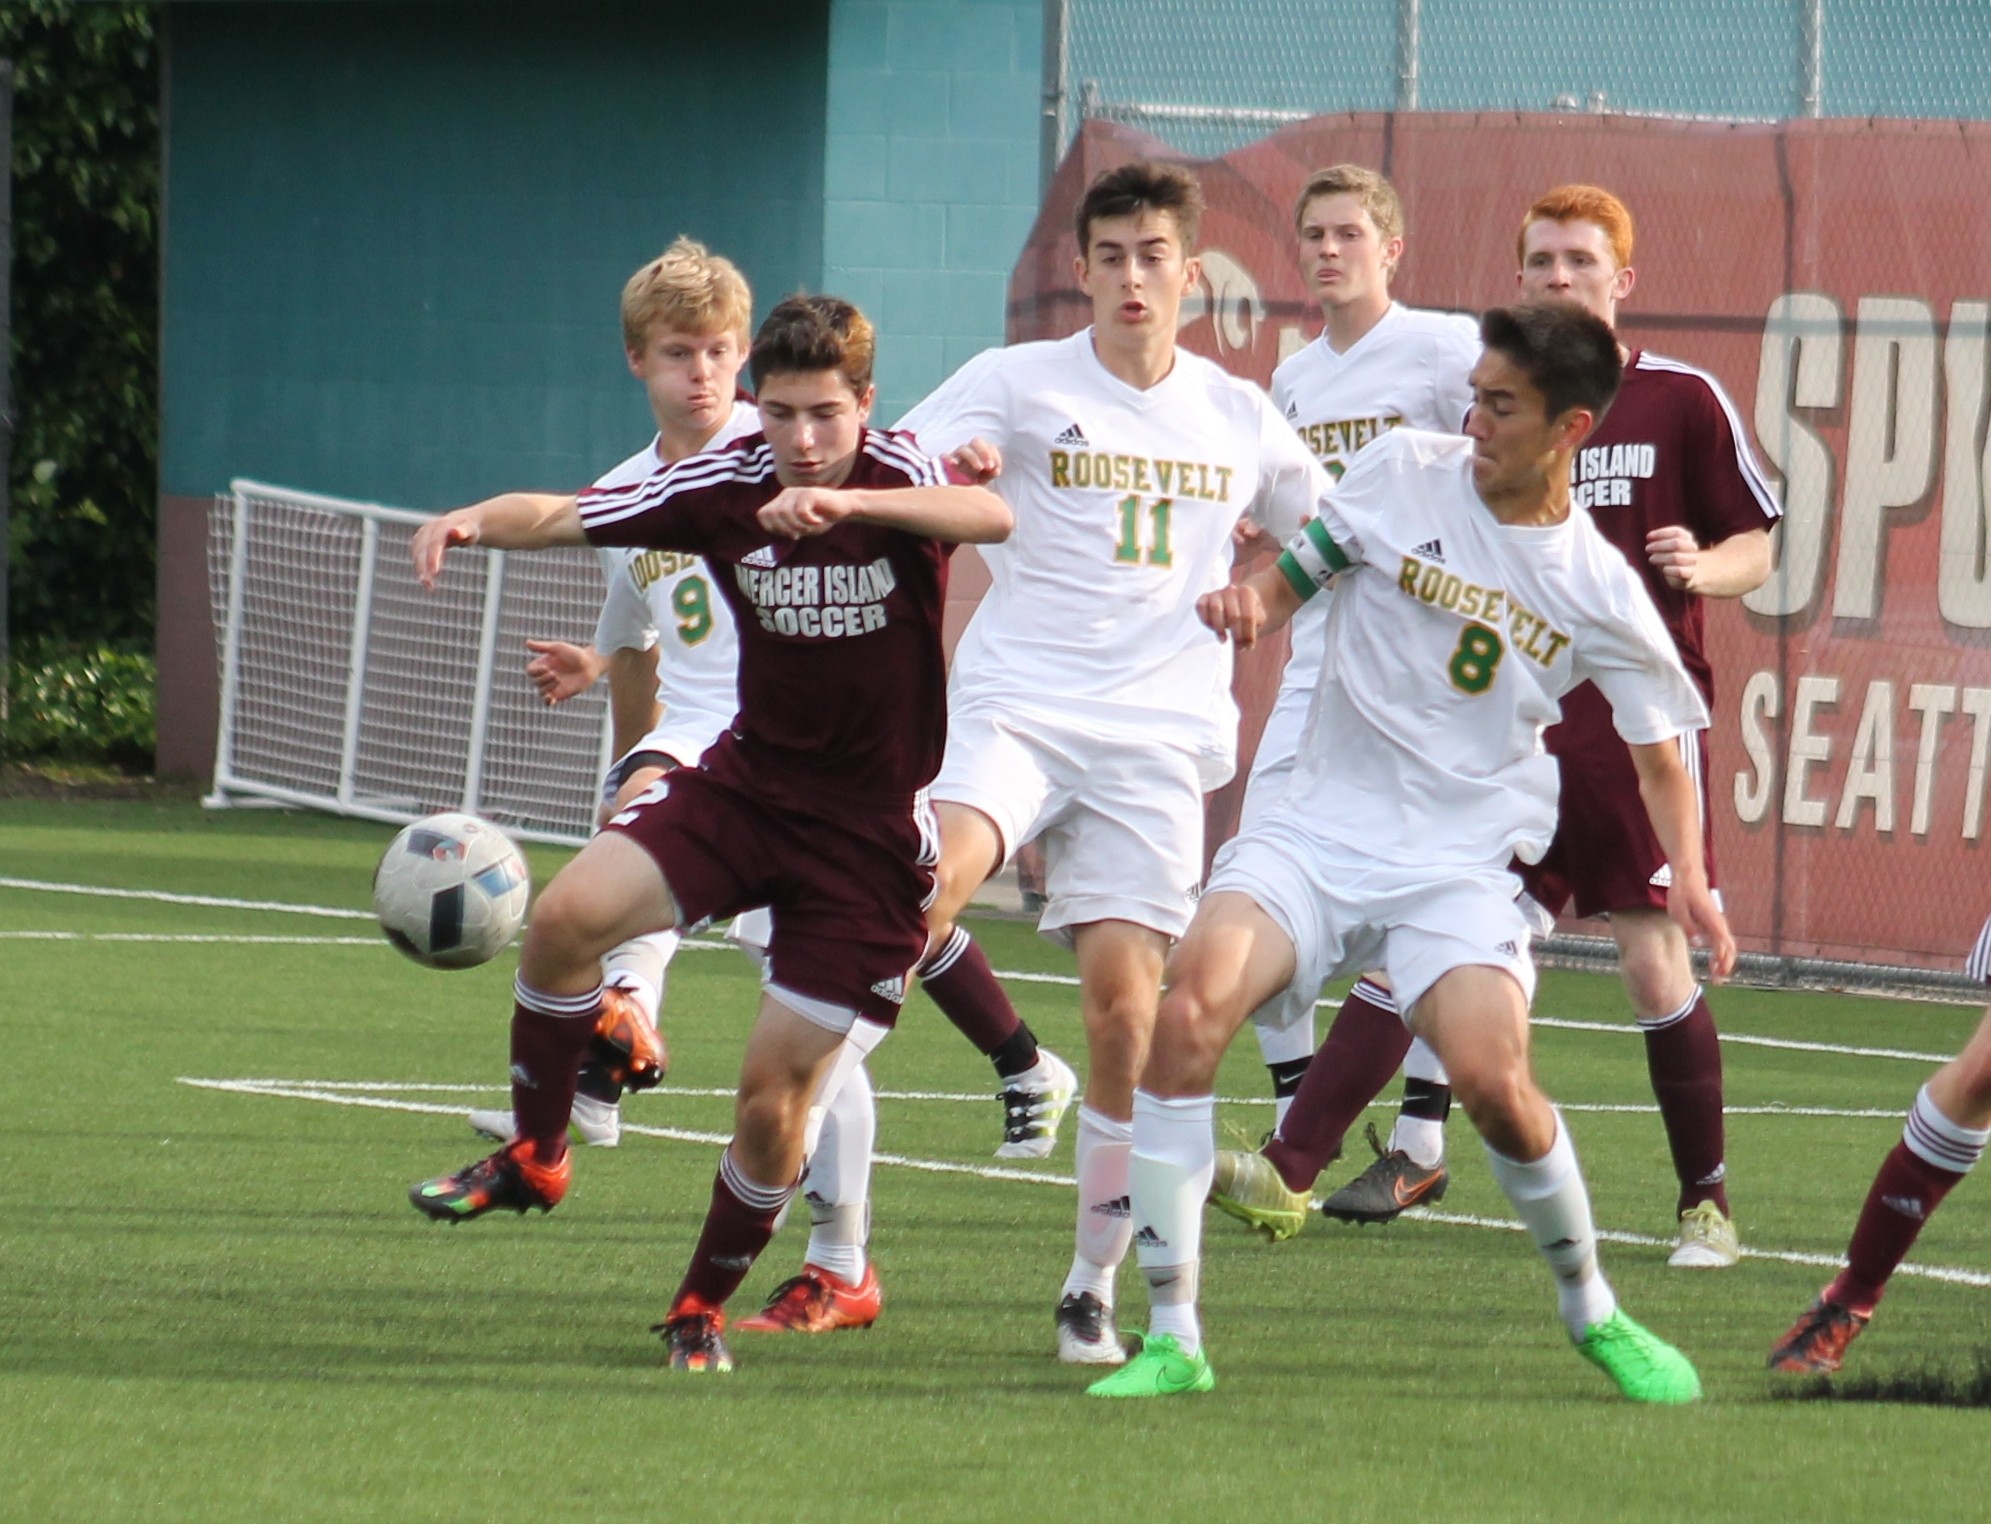 Mercer Island’s Mitchell Meade fights for possession after a corner kick during the Islanders’ 3A state quarterfinal matchup against Roosevelt Friday at Interbay Soccer Stadium in Seattle. Meade scored a goal in the Islanders’ 2-1 win over the Rough Riders (Joe Livarchik/staff photo).